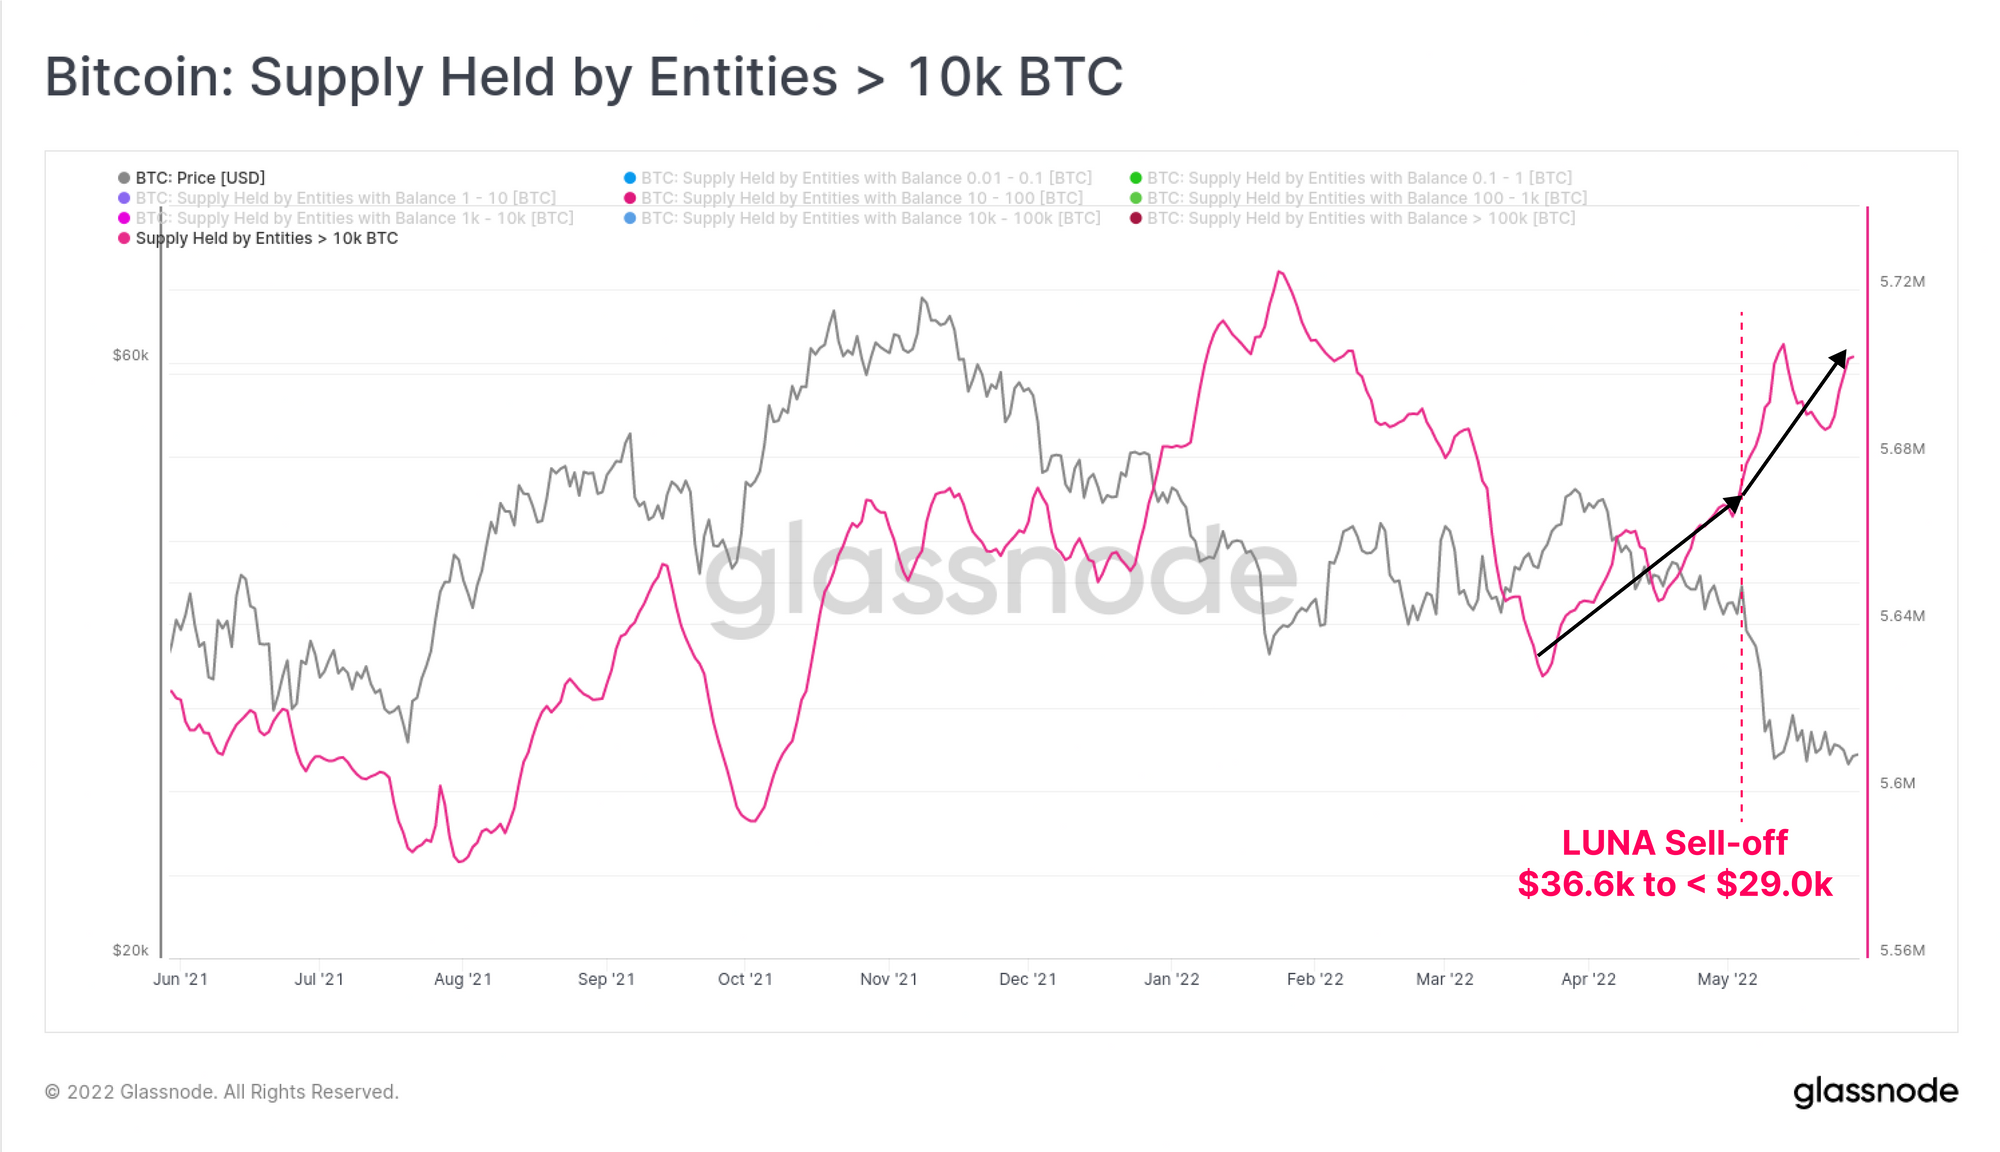 Bitcoin: Supply Held by Entities >10k BTC